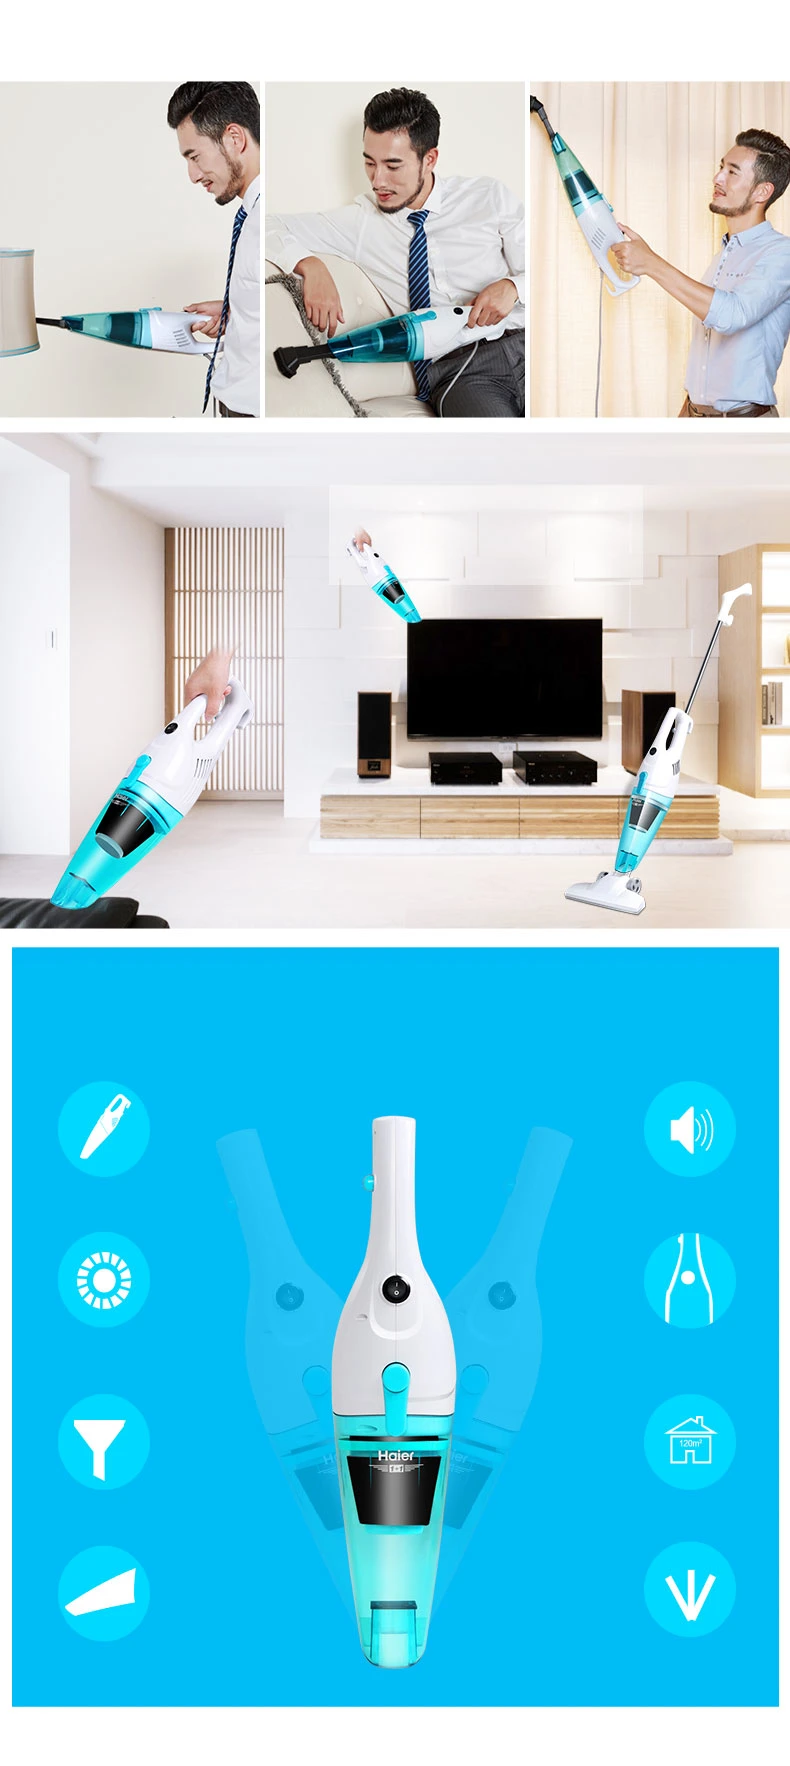 Gamana Vc1701 Good Appearance Portable Vacuum Cleaner